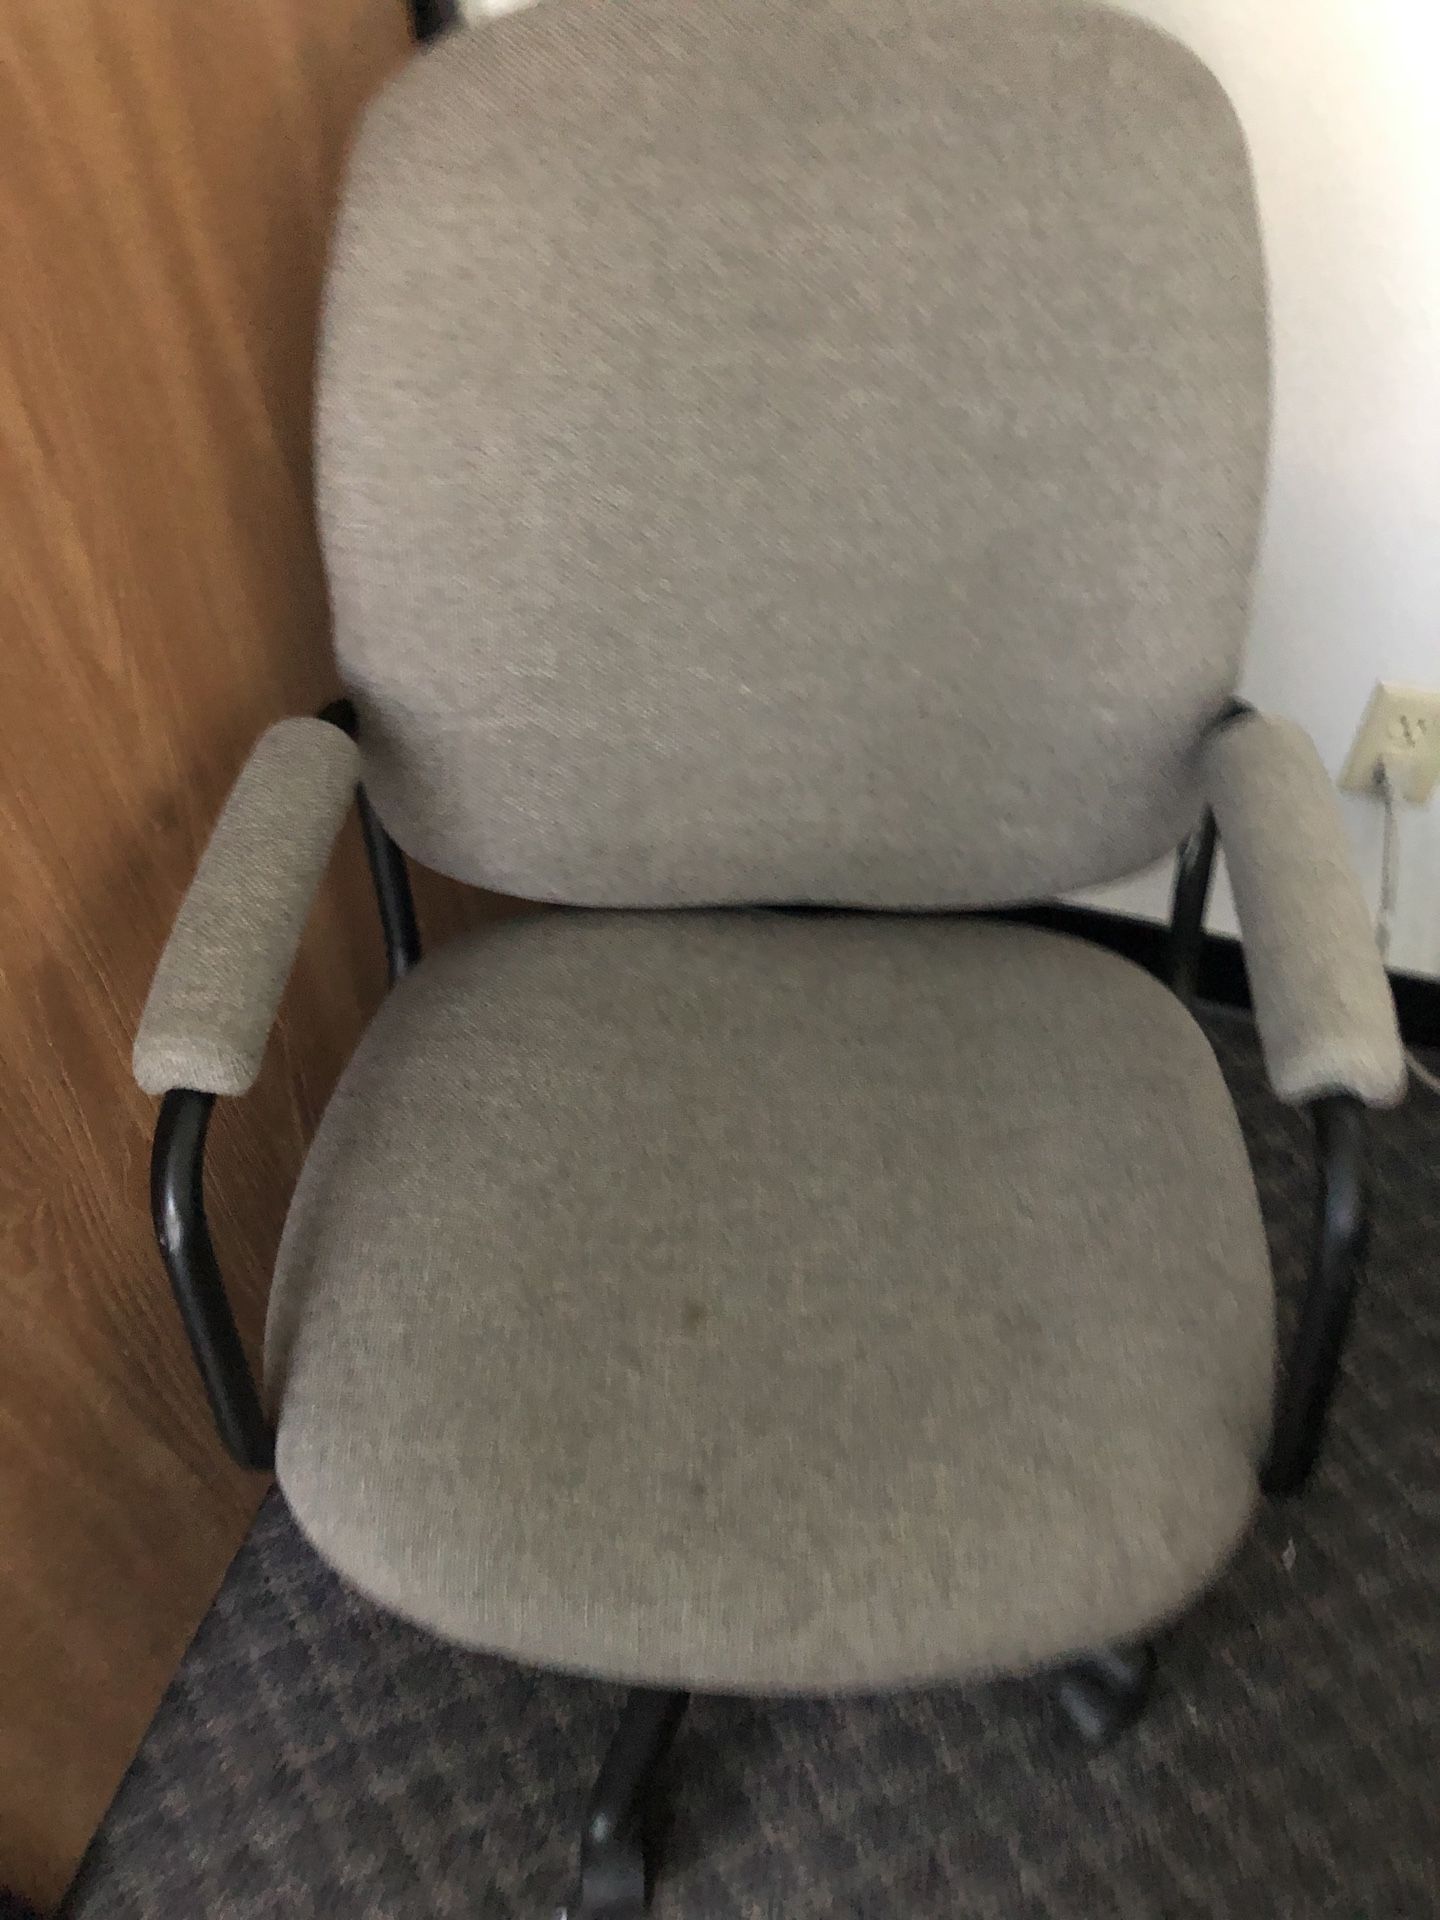 Grey office chair